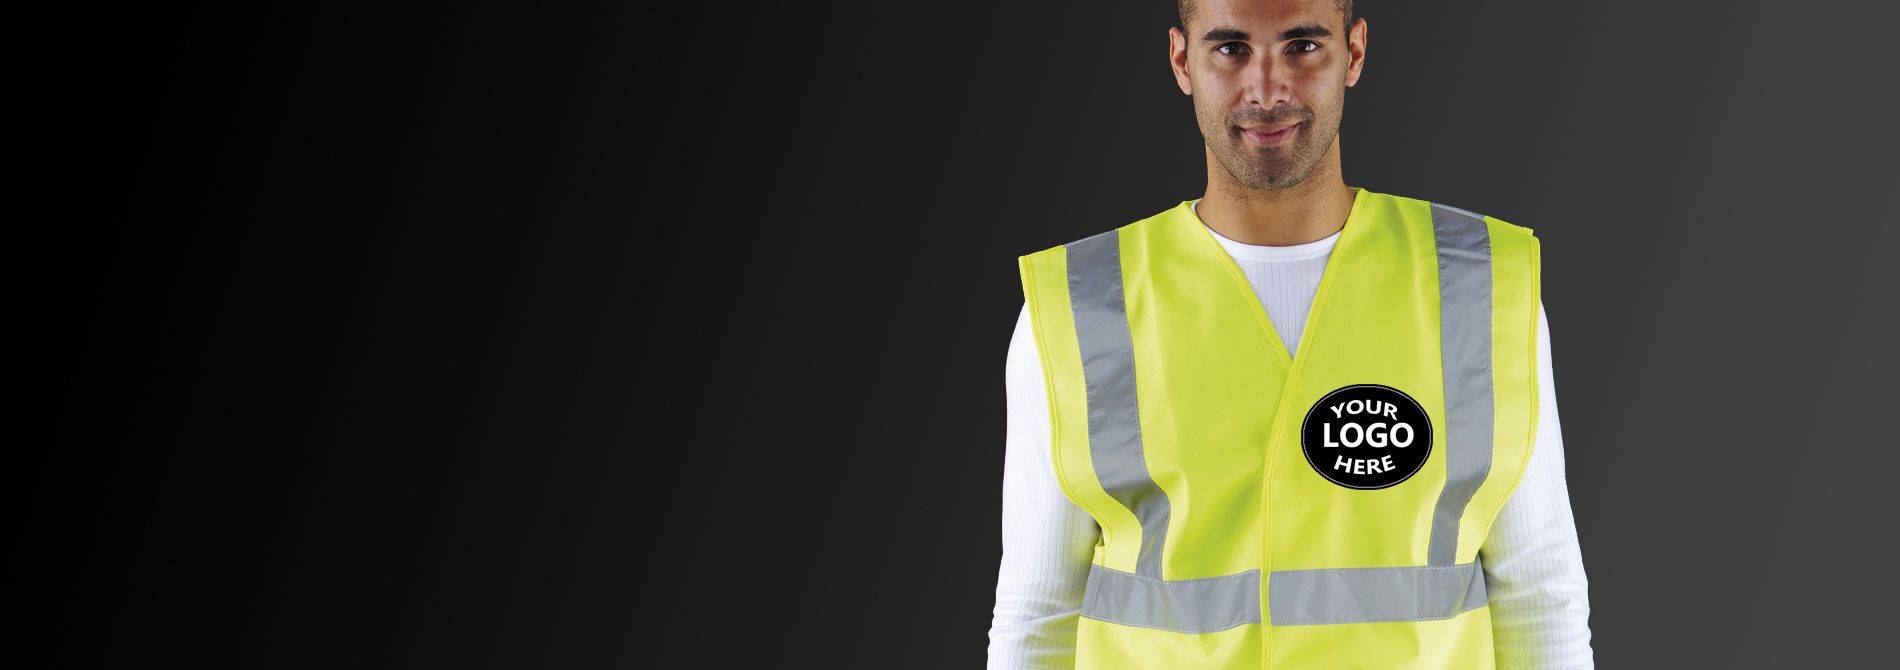 Personalised High Visibility Clothing